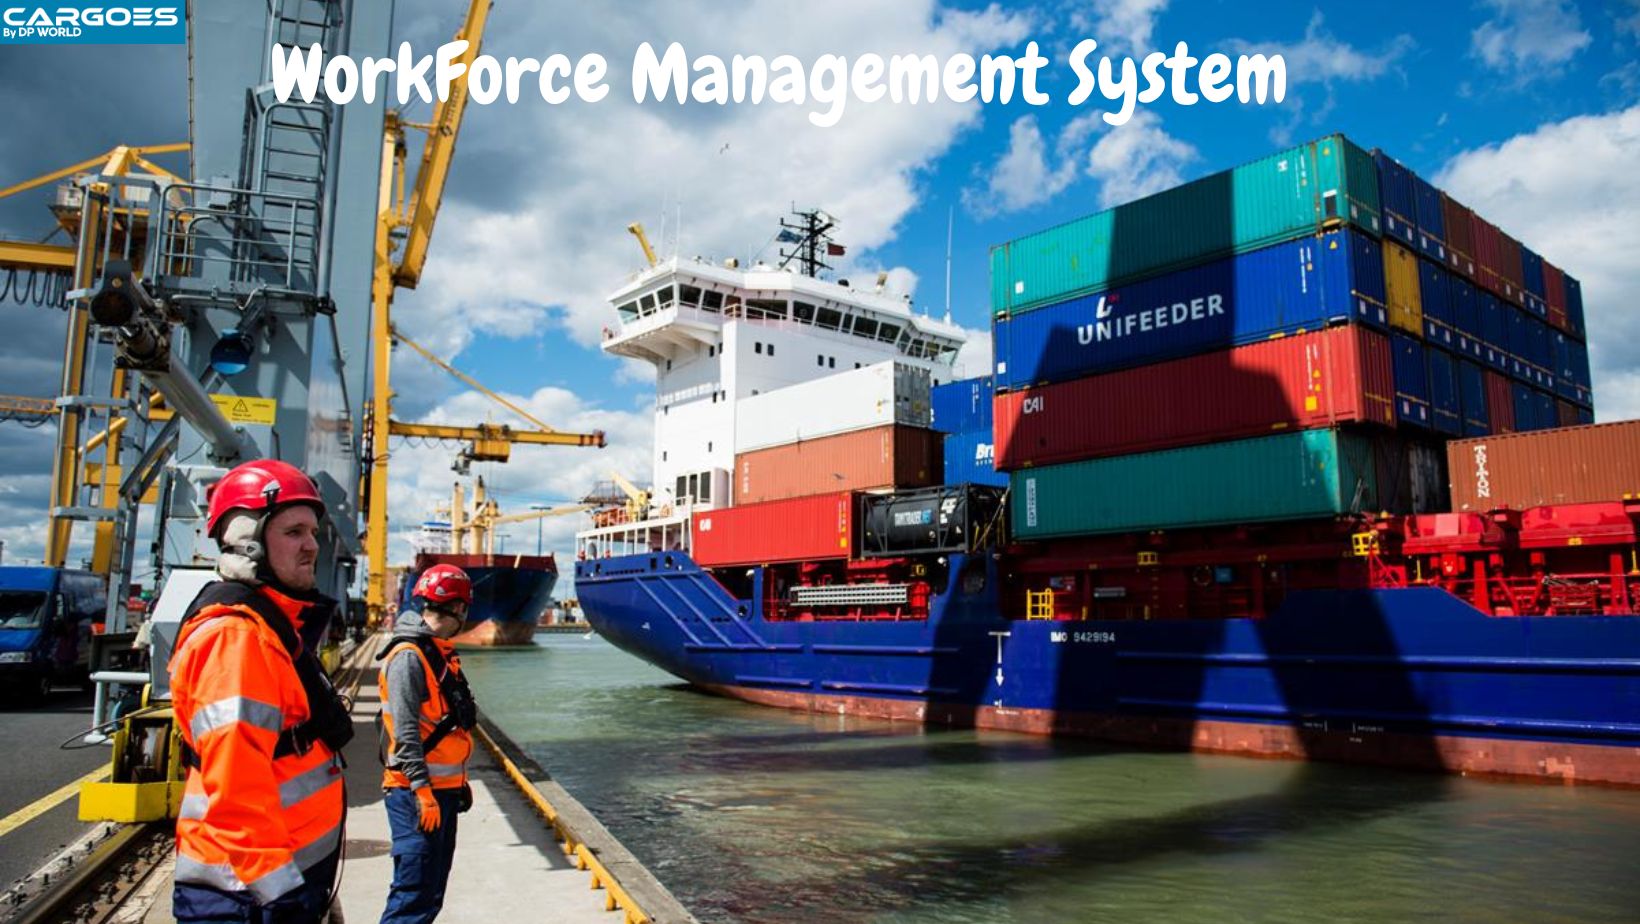 Track the Progress Of Your Employees With Workforce Management Software at Cargoes